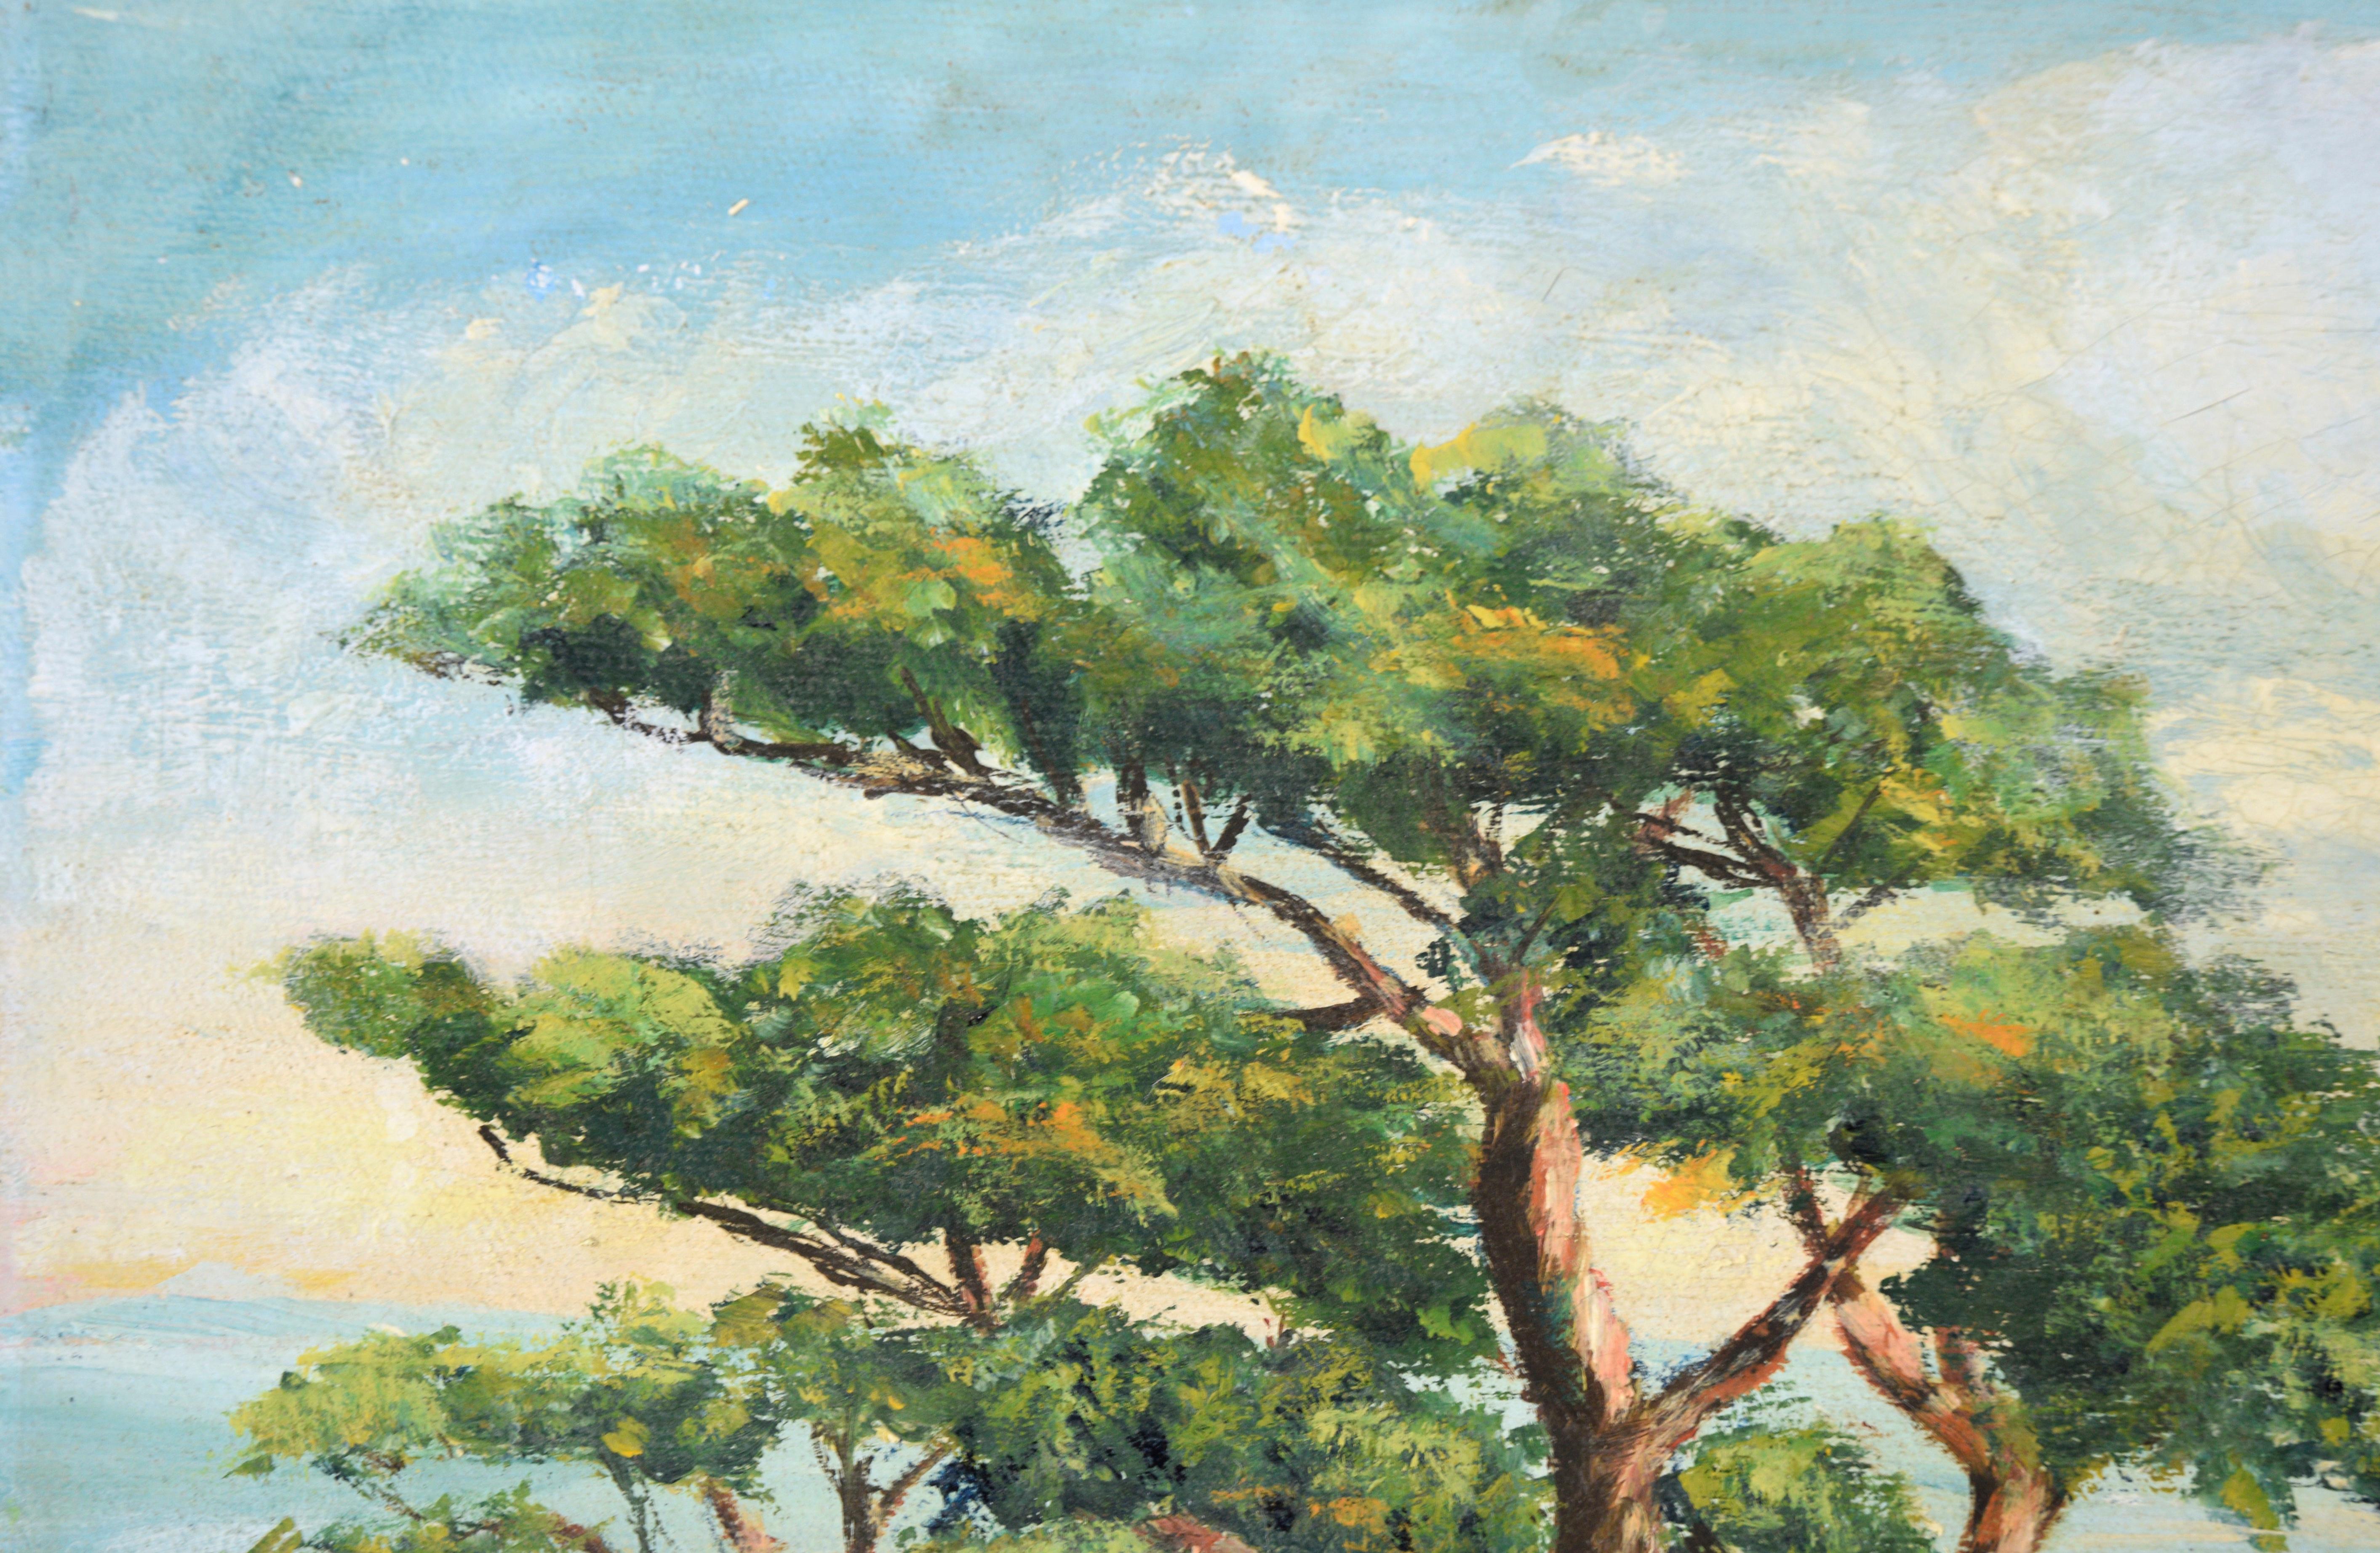 Monterey Cypress - Carmel by the Sea California Seascape in Oil on Canvas - Painting by E Holton